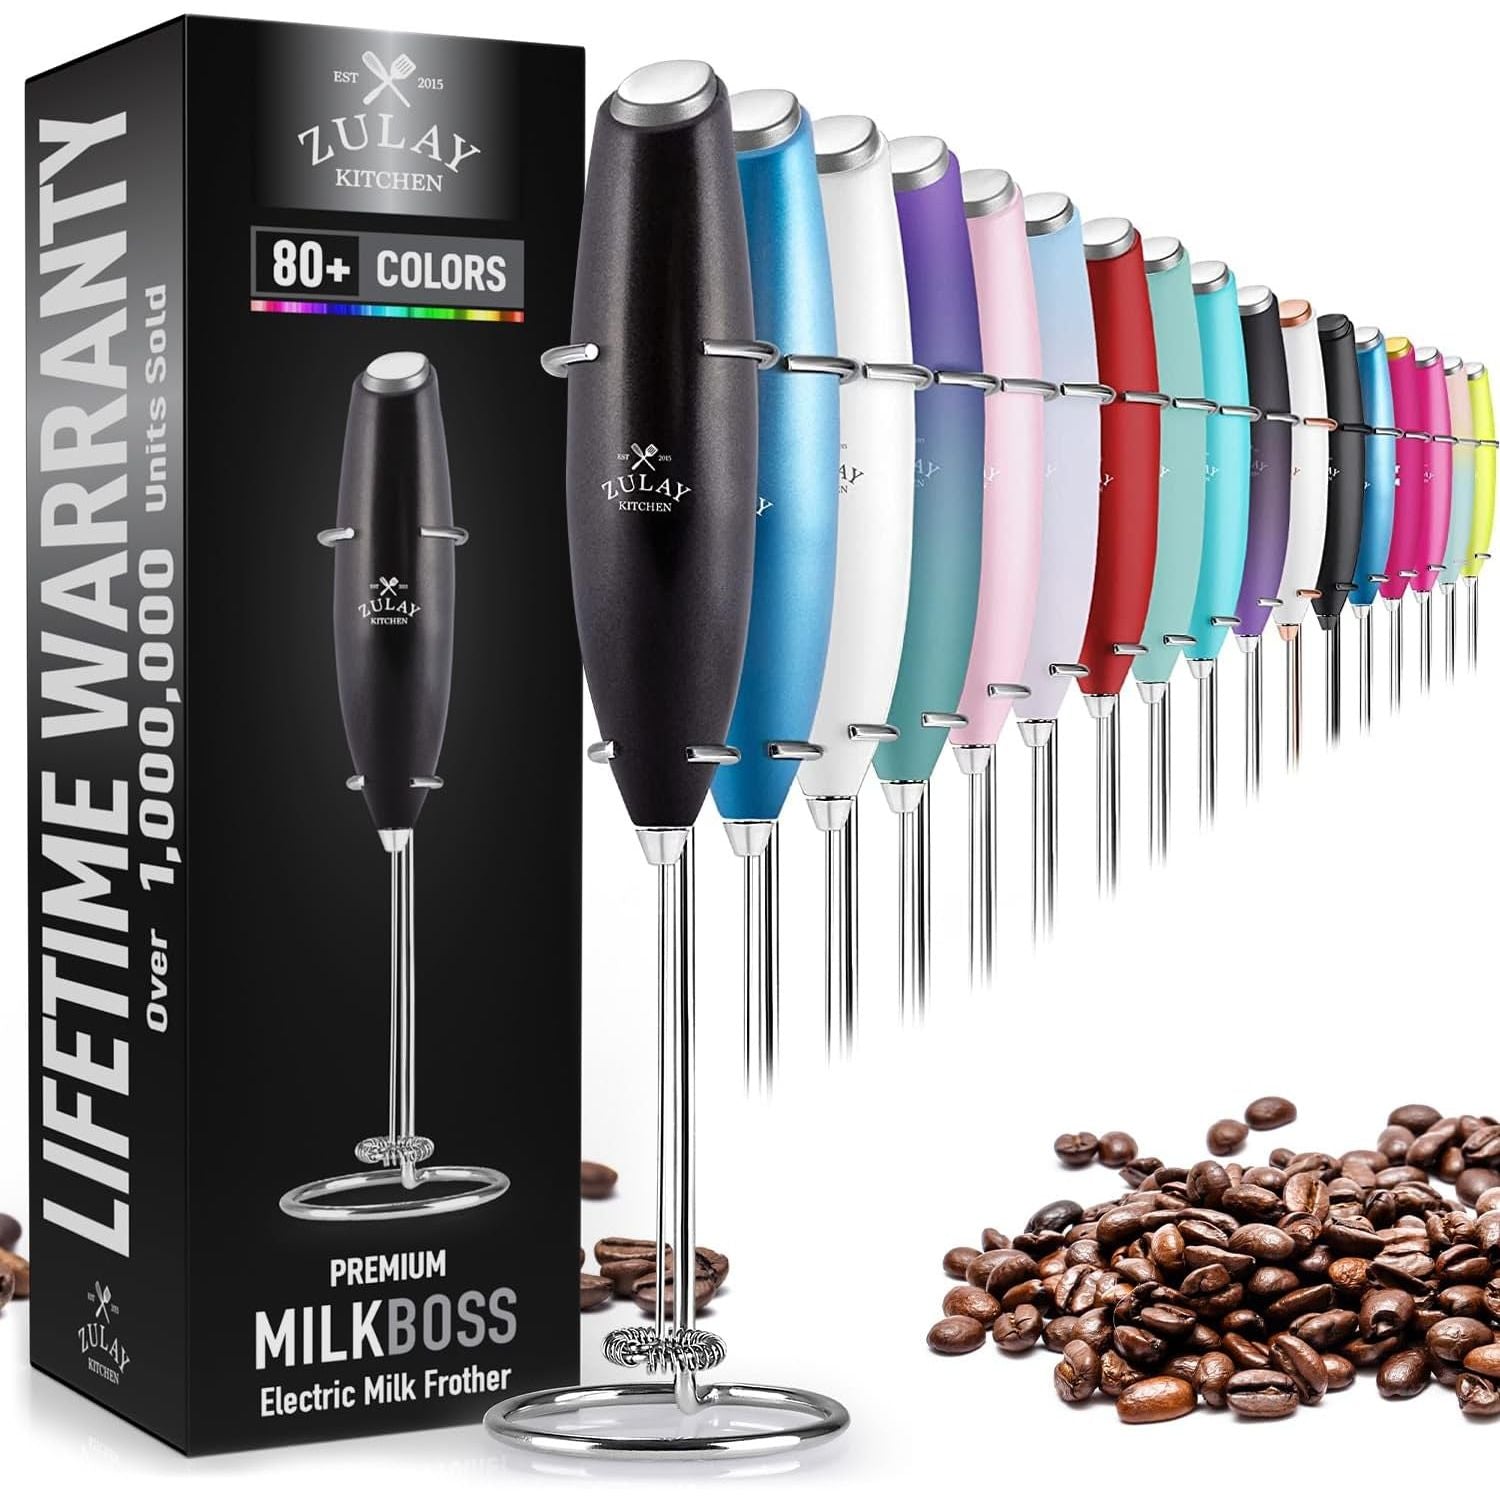 Milk Boss Milk Frother With Stand Online